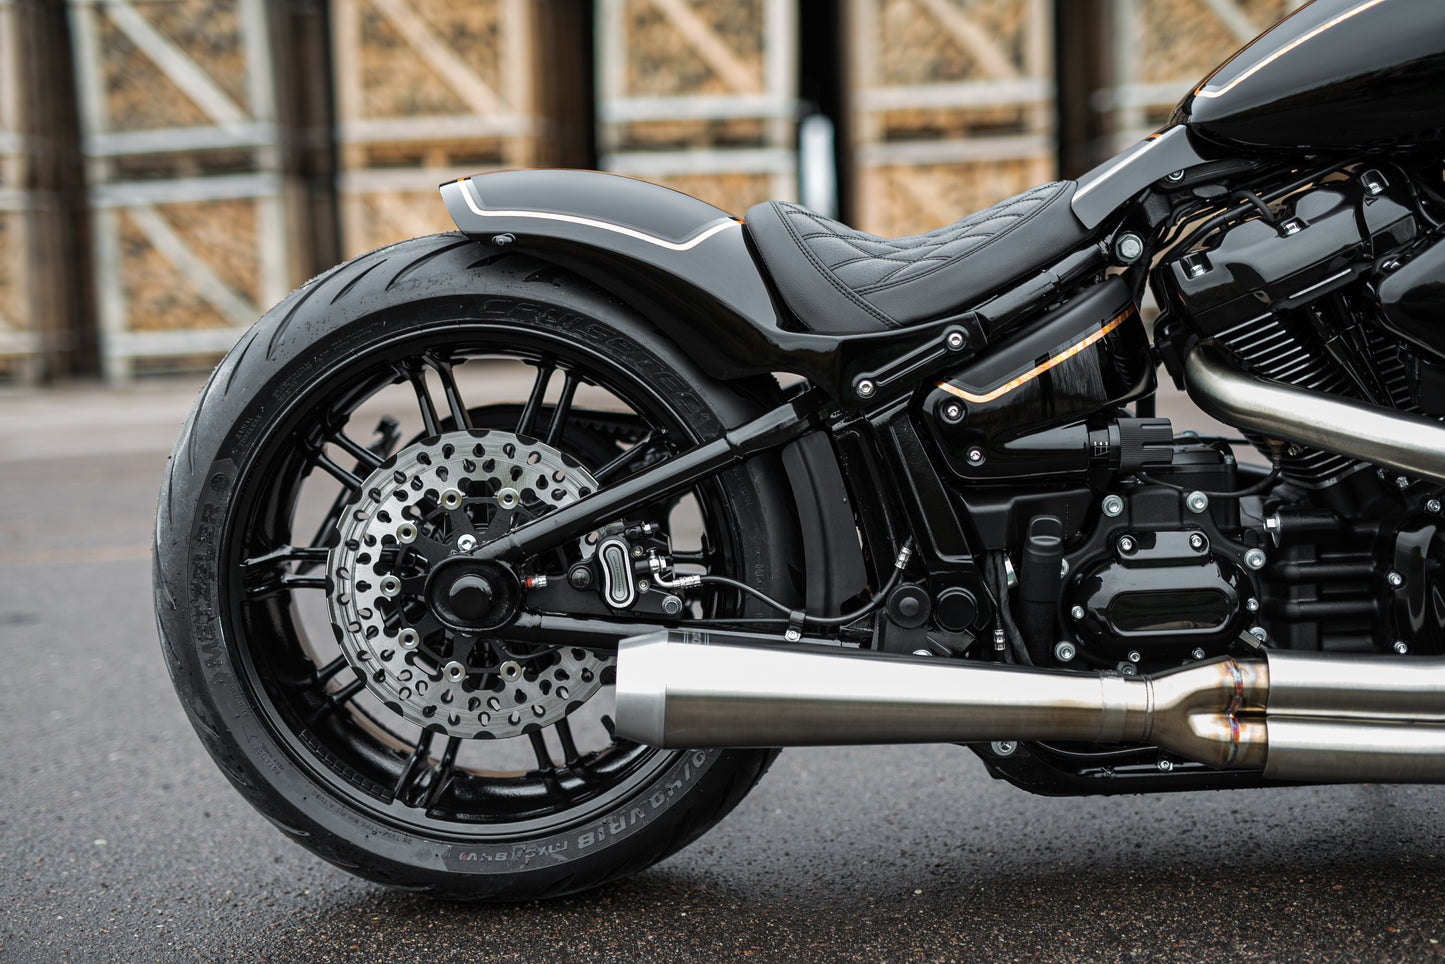 Harley Davidson motorcycle with Killer Custom swingarm axle cover set from the side in an industrial environment